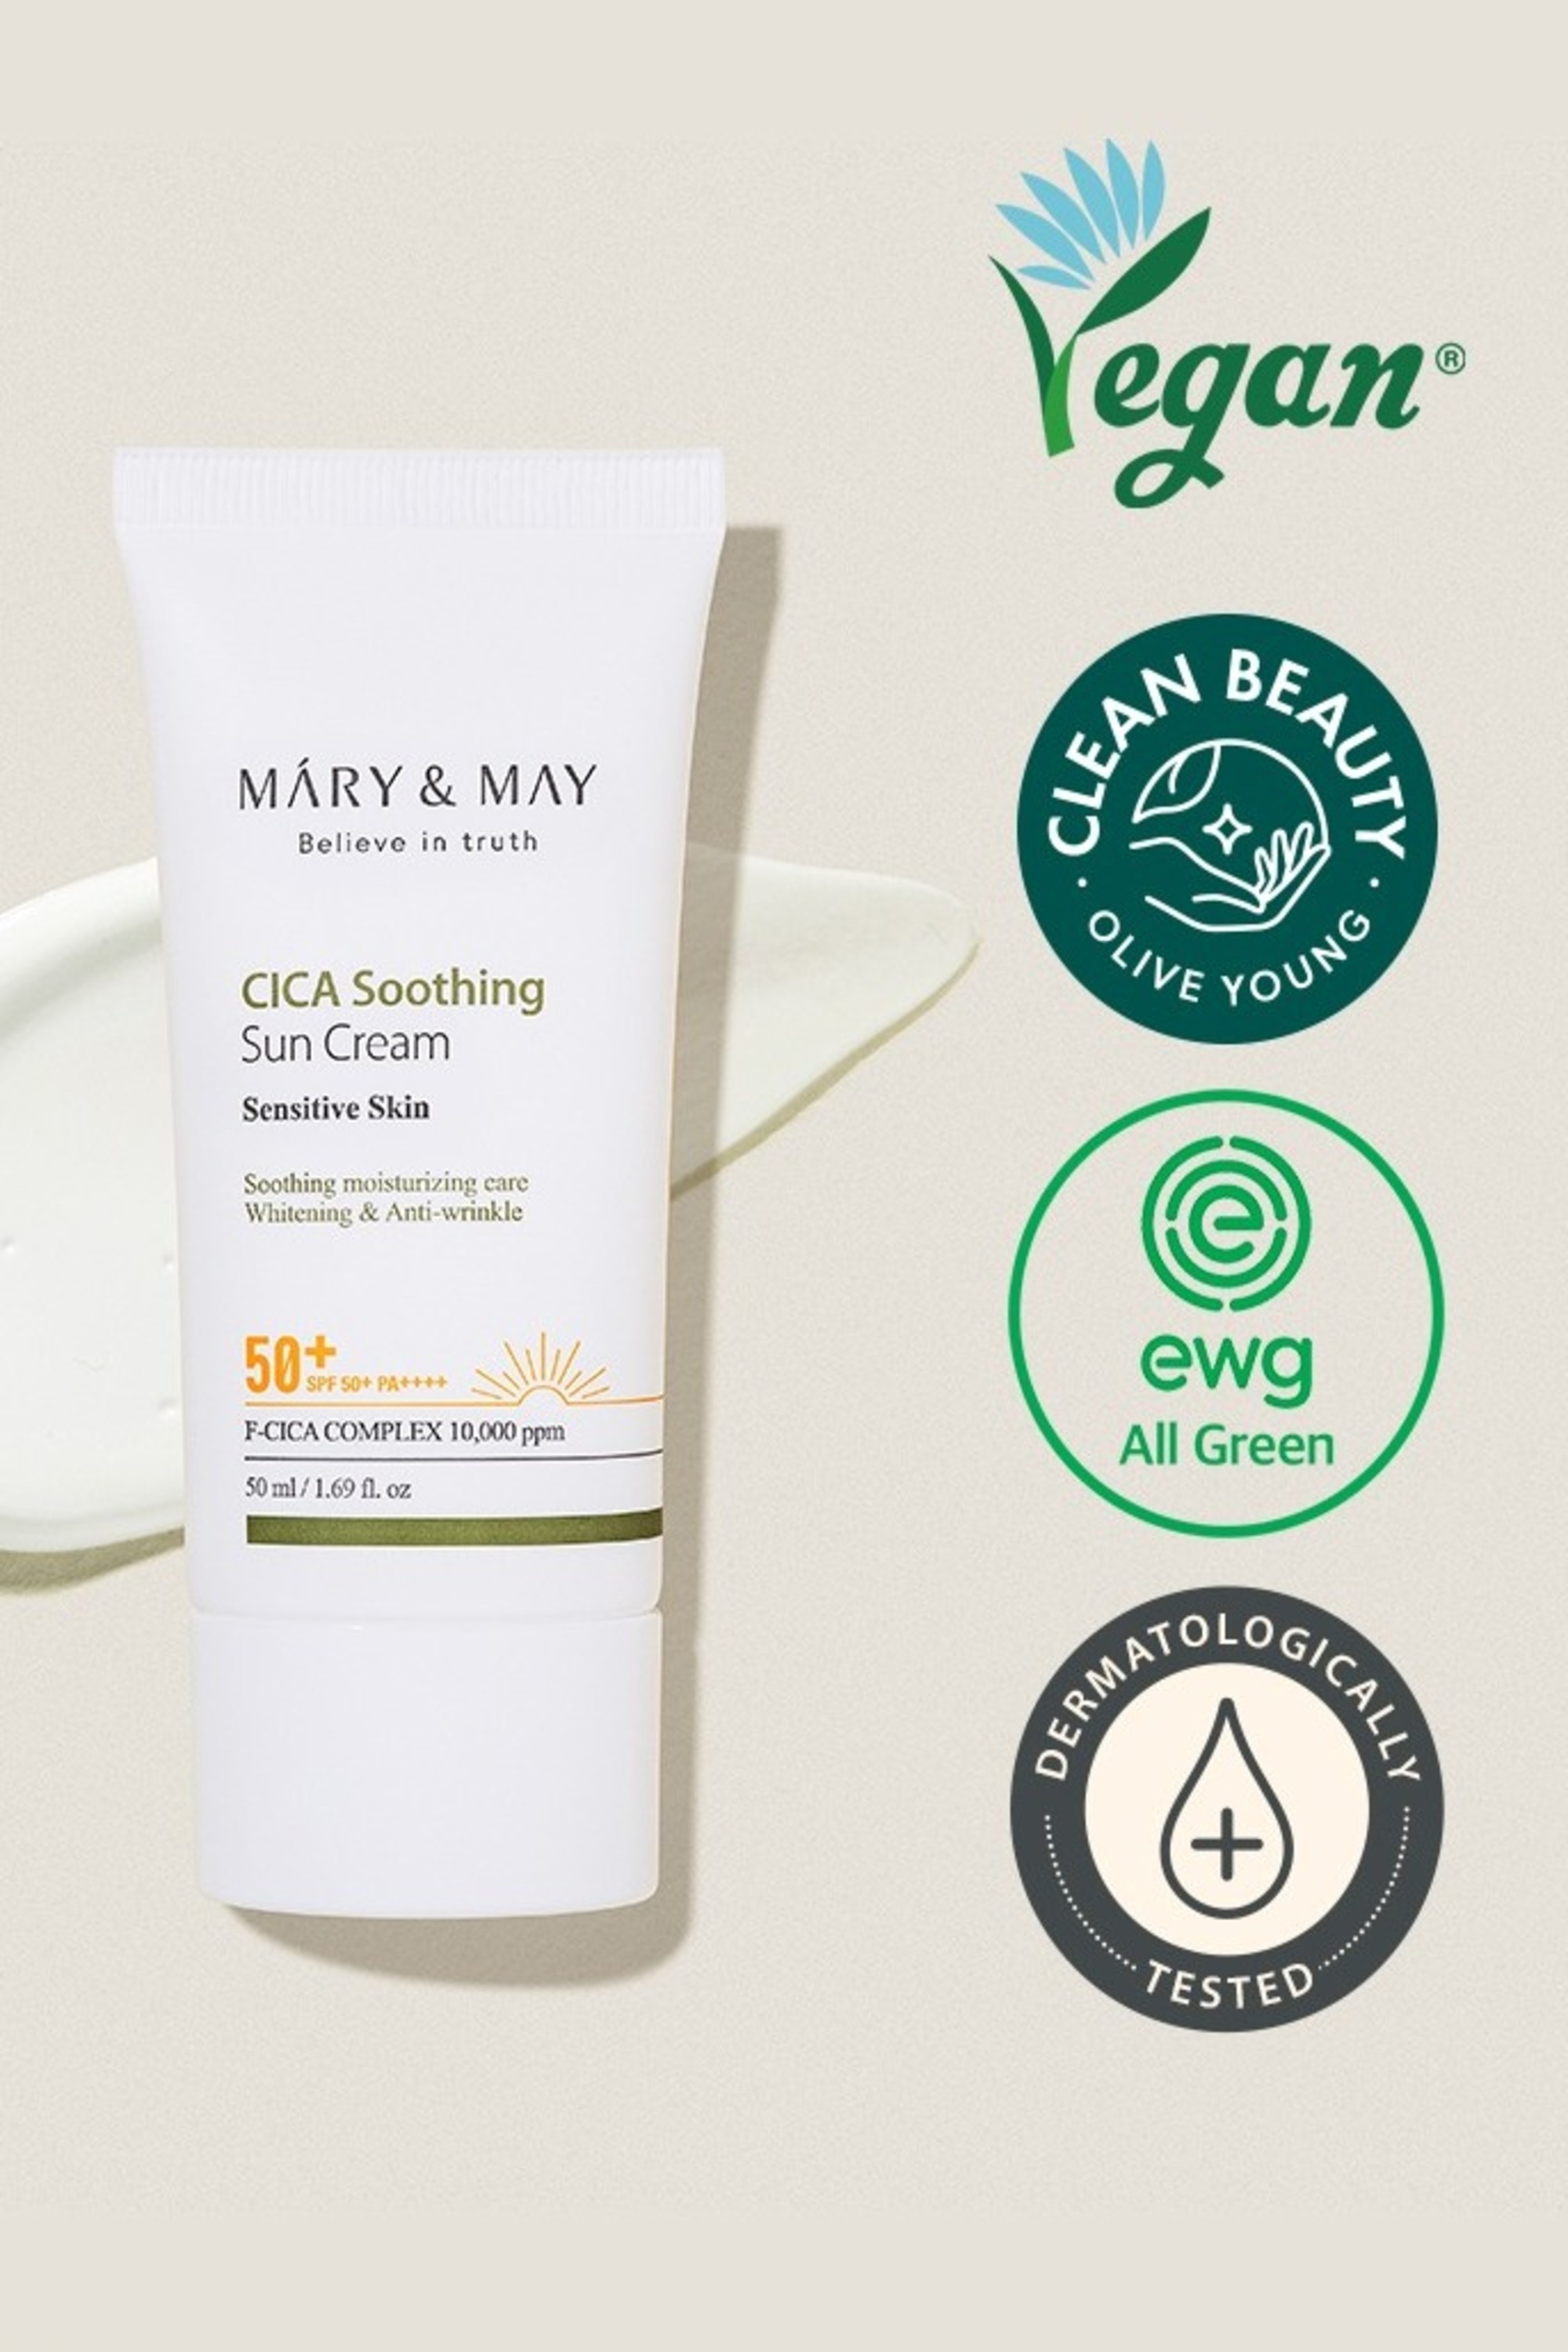  MARY & MAY CICA Soothing Sun Cream..